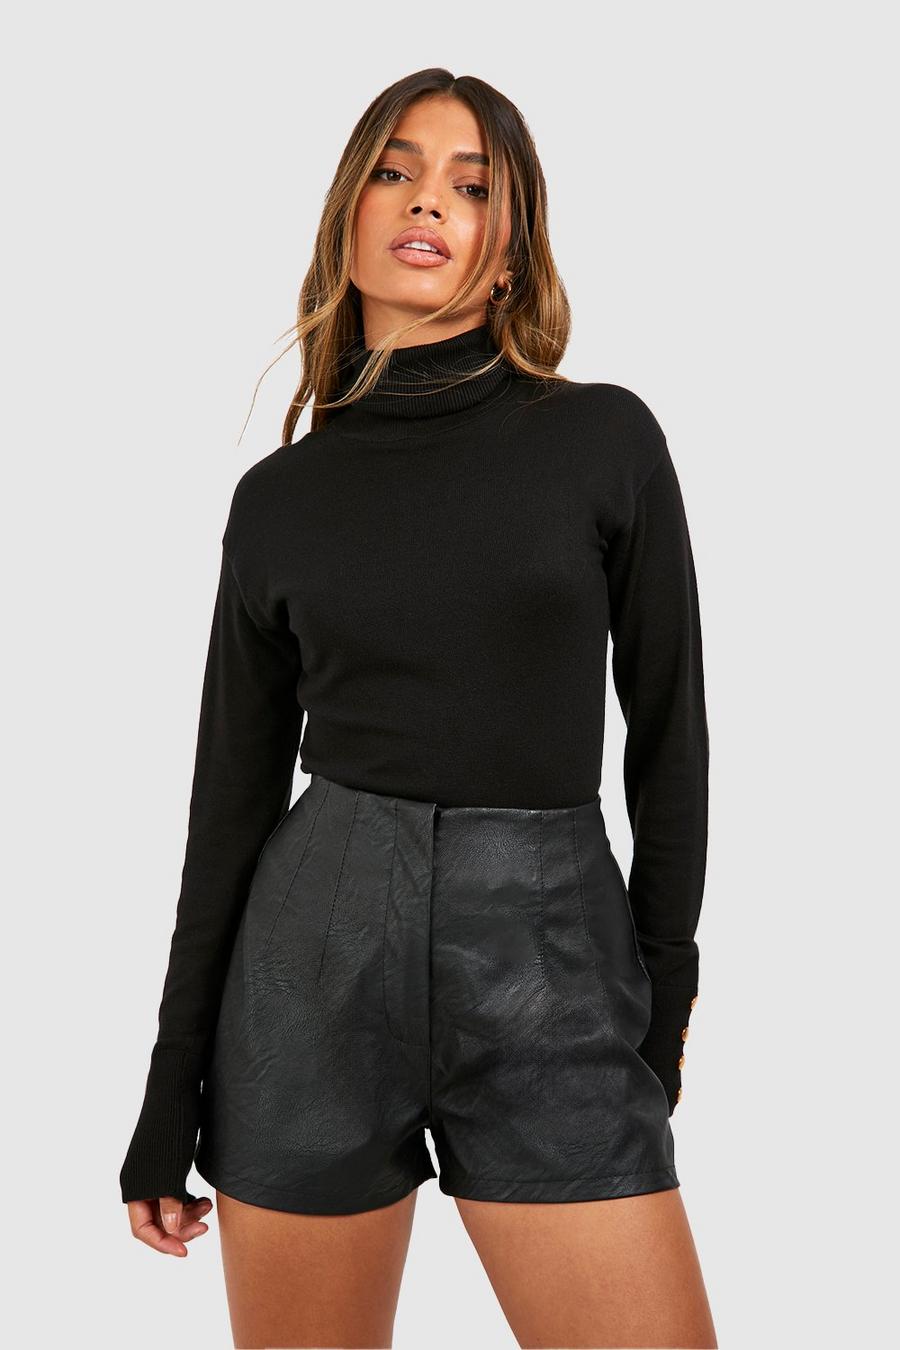 Black Faux Leather Look Tailored High Waist Shorts